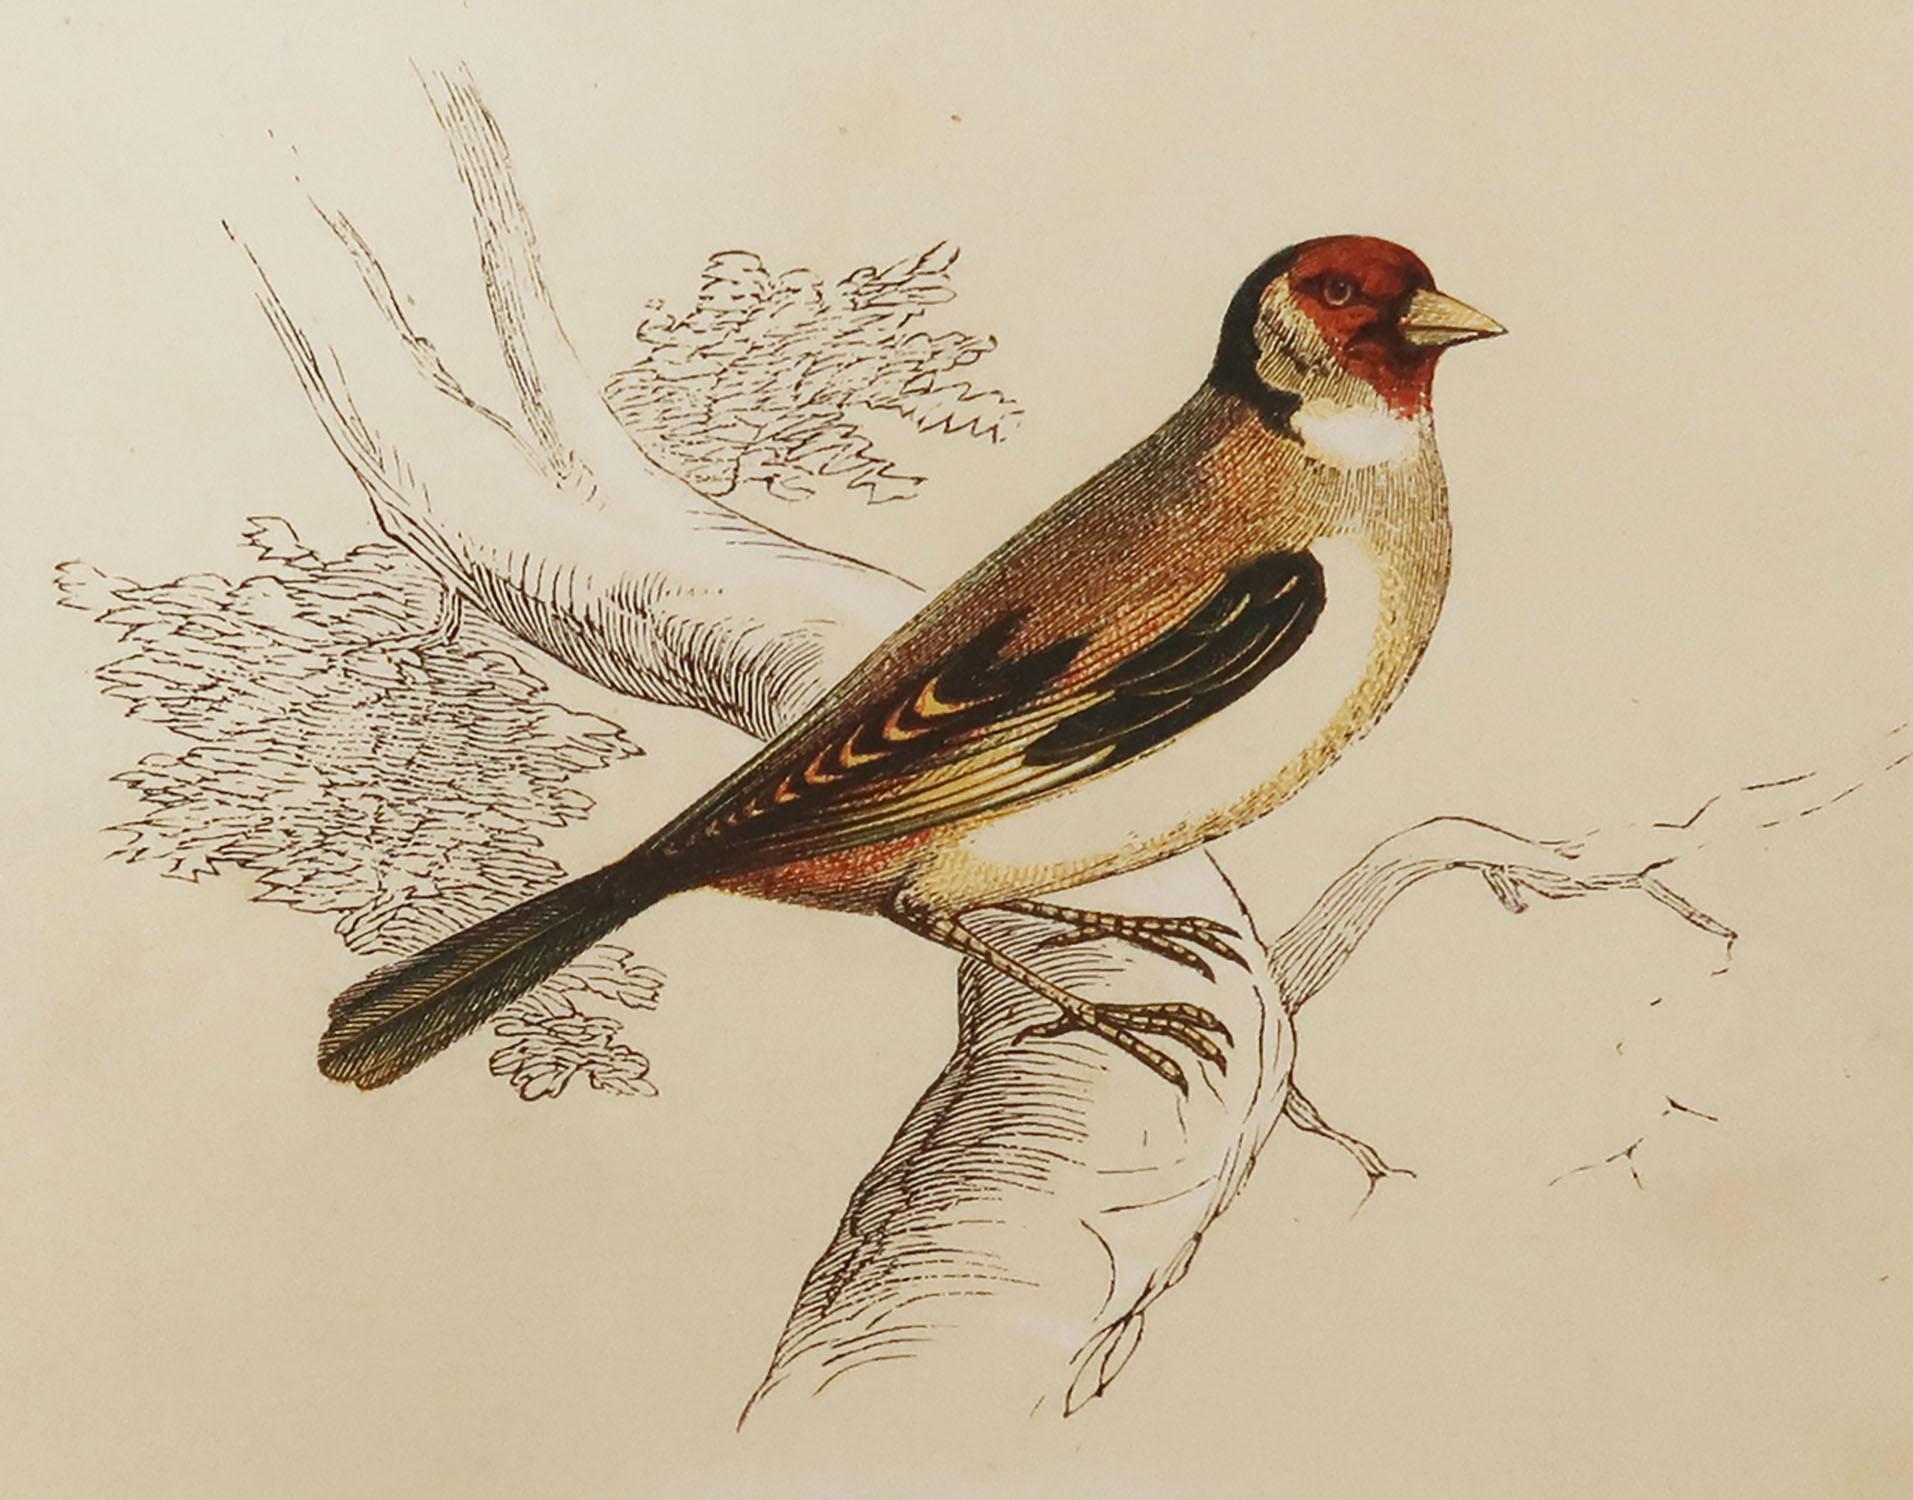 Great image of a goldfinch

Unframed. It gives you the option of perhaps making a set up using your own choice of frames.

Lithograph with original color.

Published by Tallis circa 1850

Crudely inscribed title has been erased at the bottom